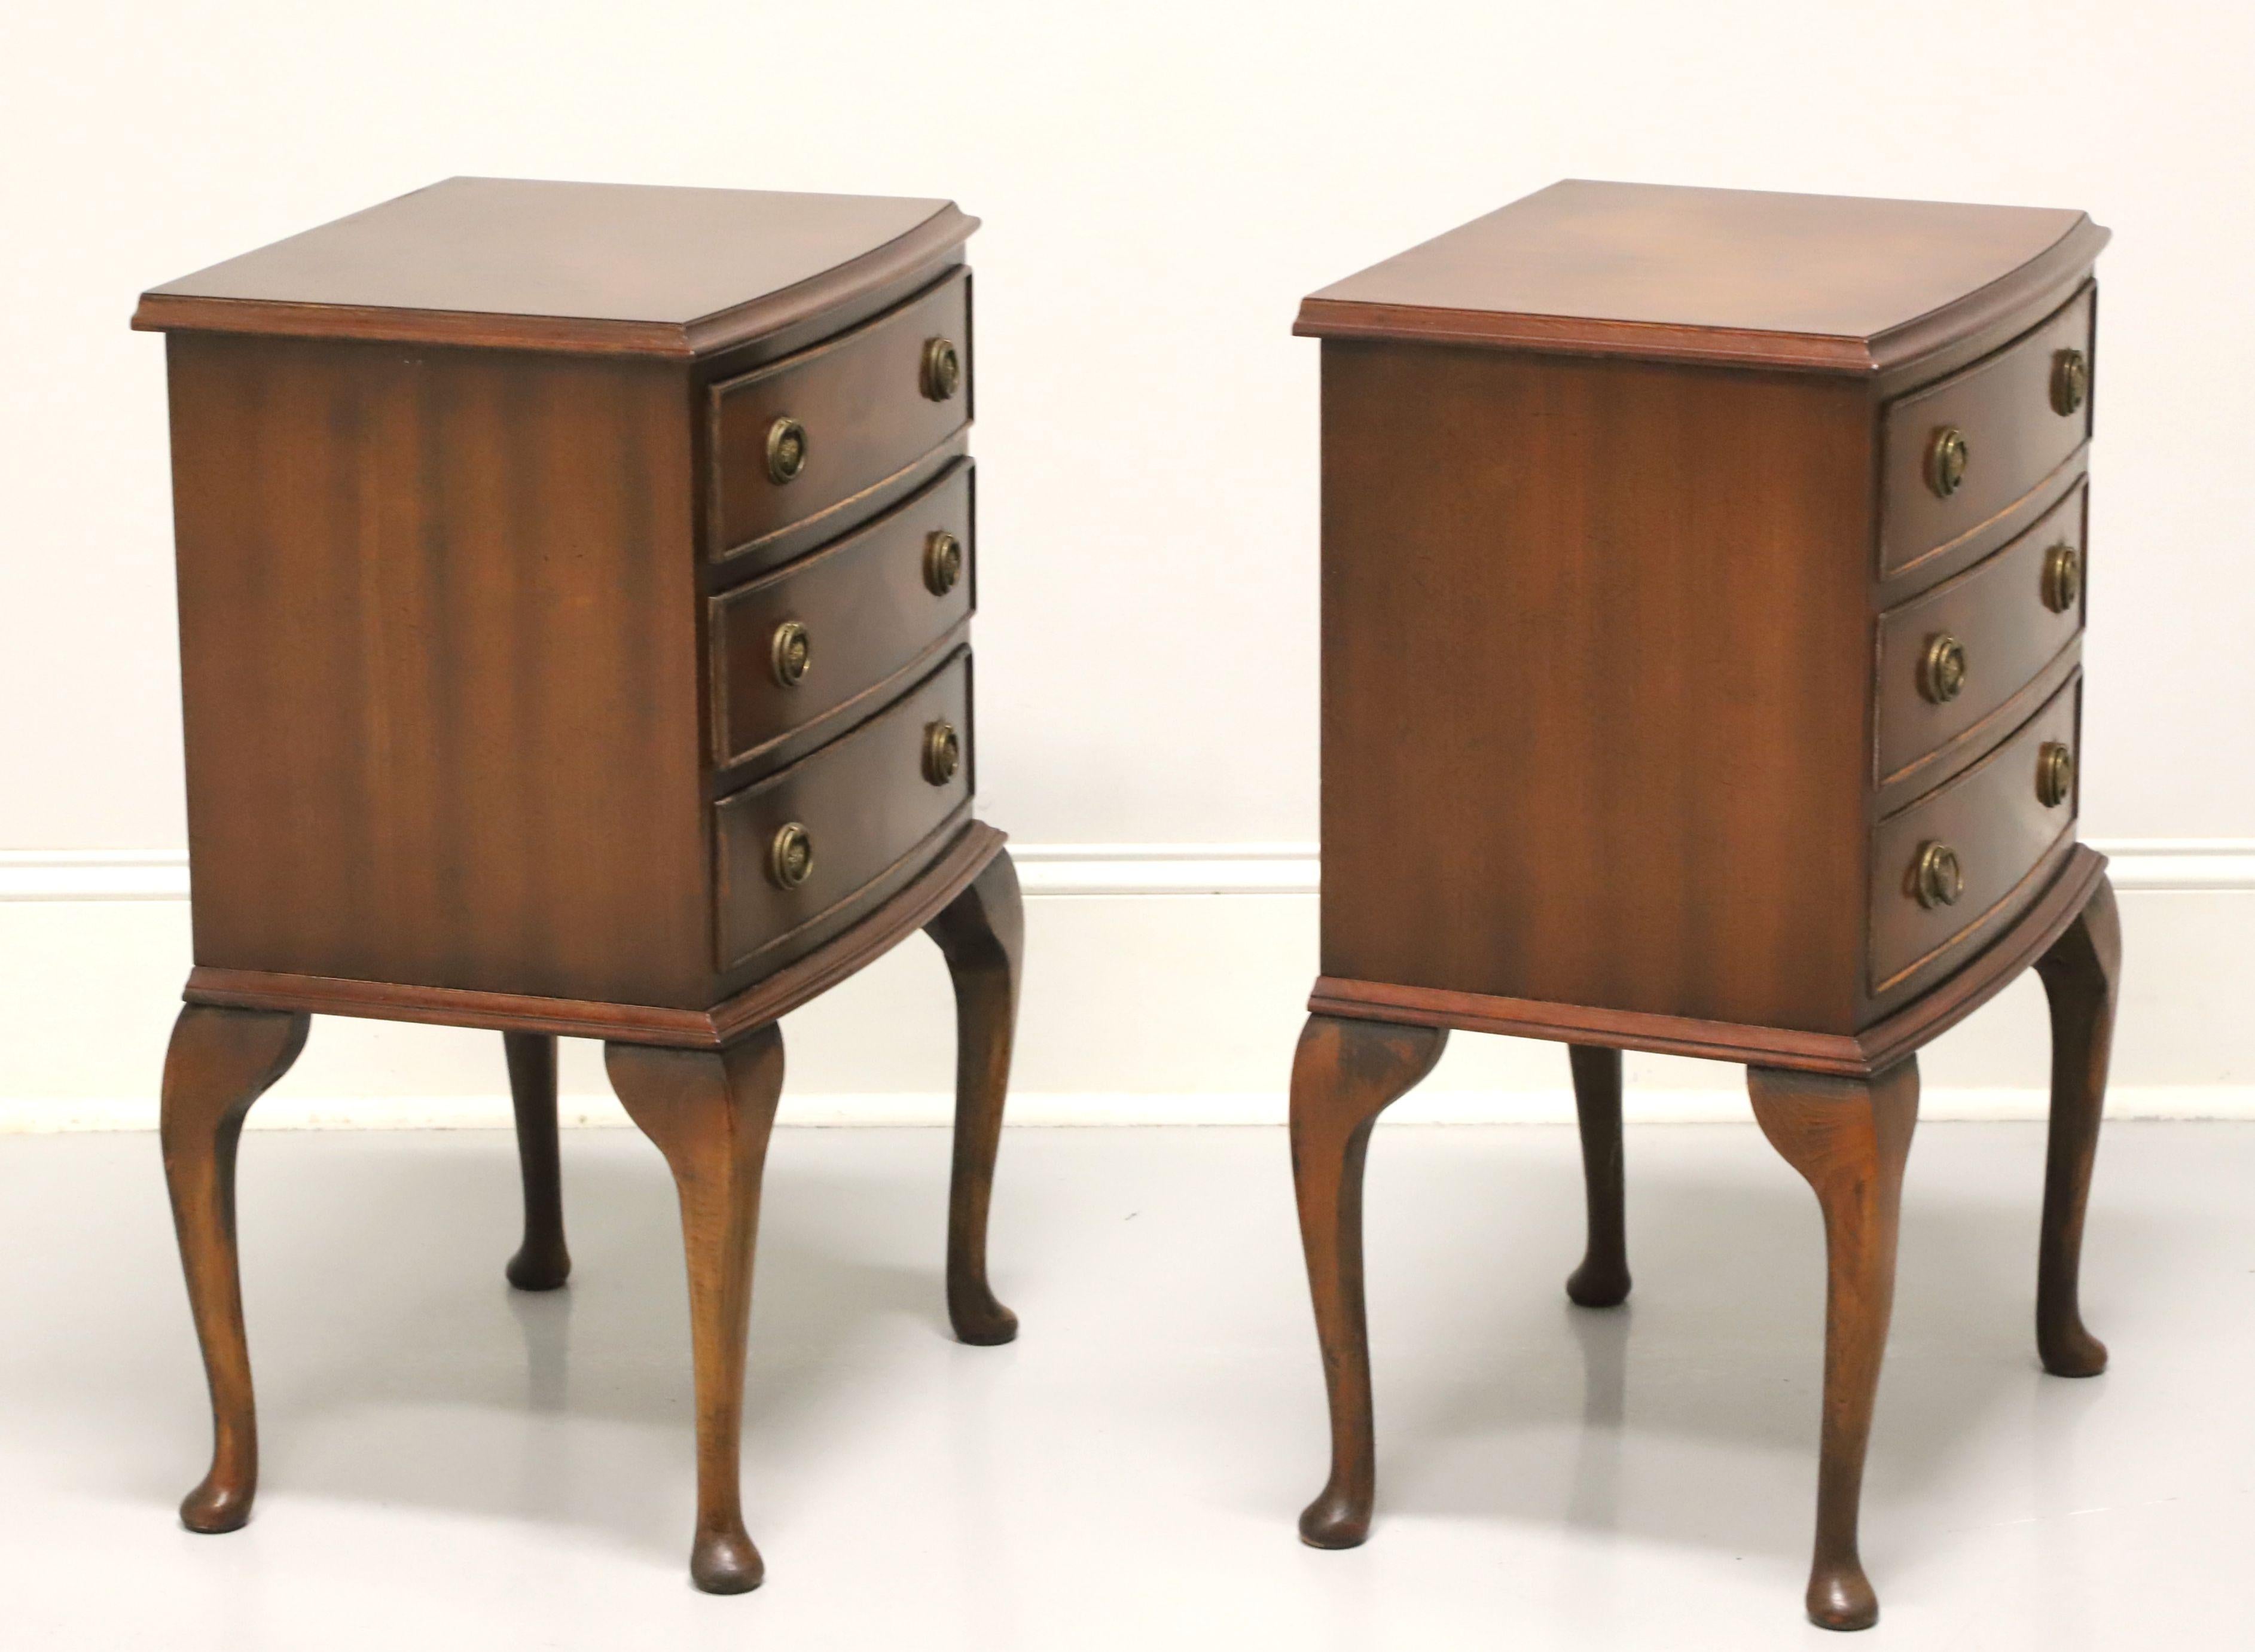 A pair of Georgian style side tables by Bevan Funnell. Mahogany with flame mahogany drawer fronts, brass hardware, cabriole legs and pad feet. Features three drawers of dovetail construction. Made in England, in the mid 20th century.

Measures: